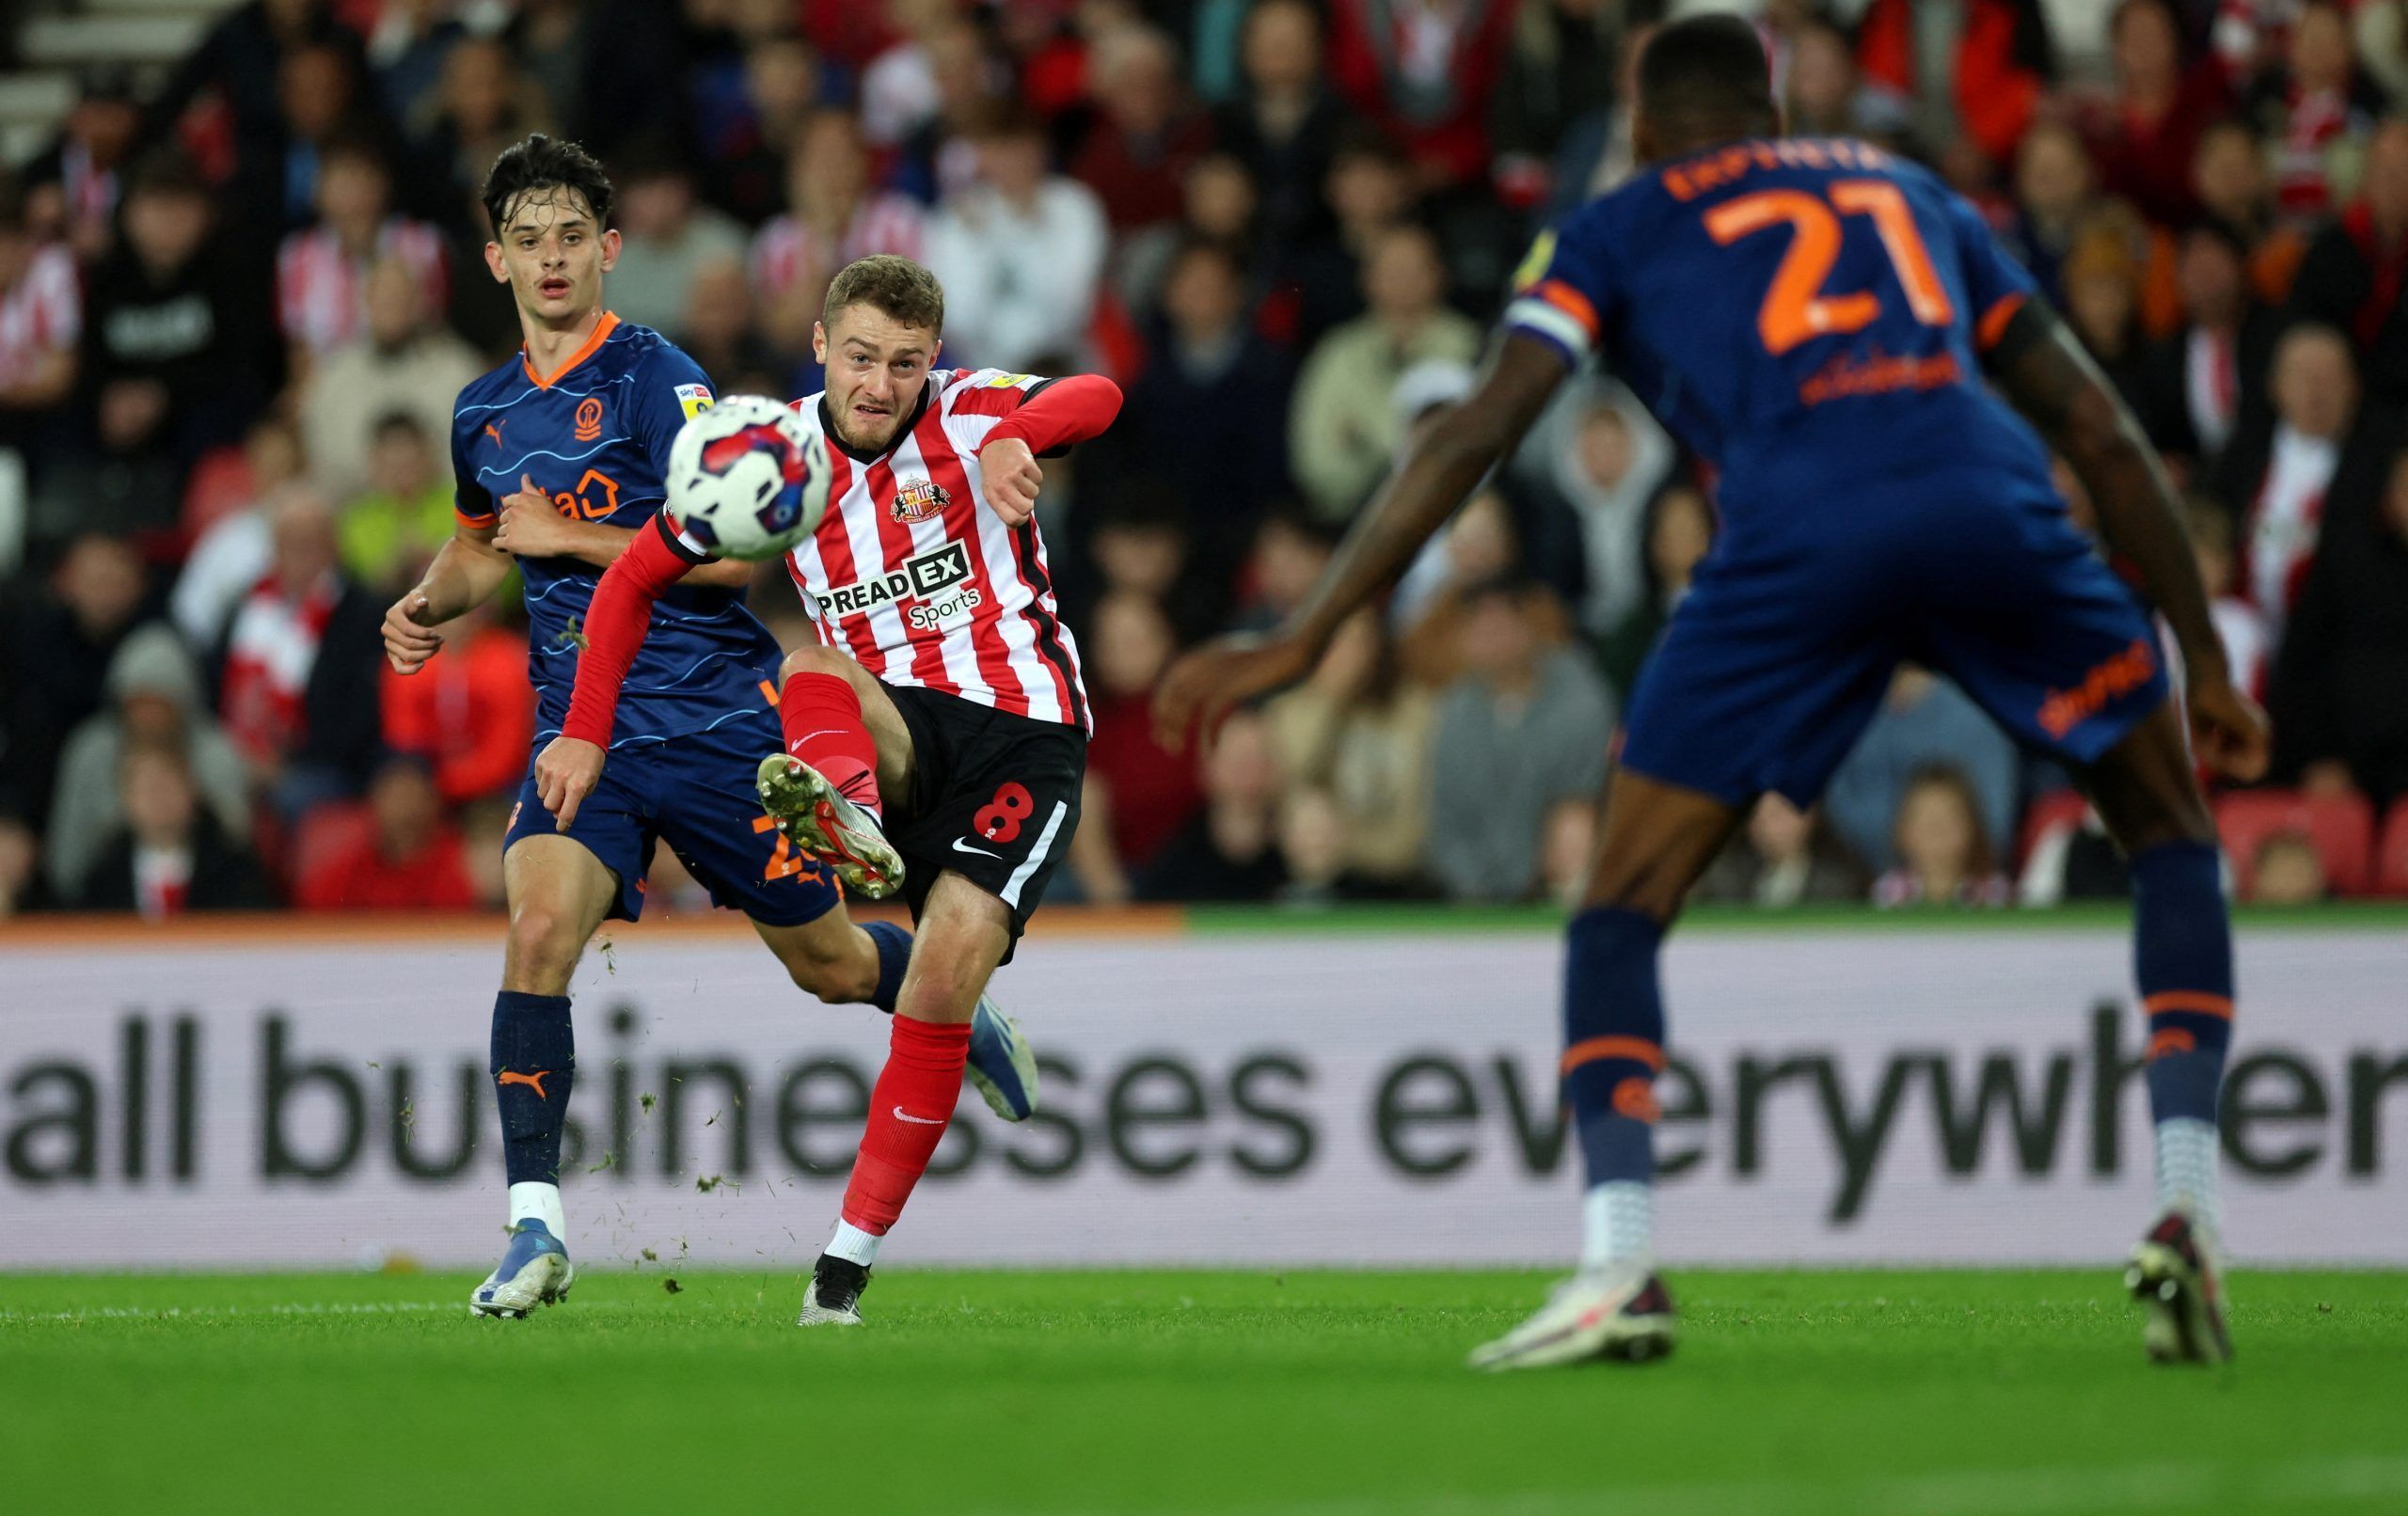 Soccer Football - Championship - Sunderland v Blackpool - Stadium of Light, Sunderland, Britain - October 4, 2022  Sunderland's Elliot Embleton in action   Action Images/Lee Smith  EDITORIAL USE ONLY. No use with unauthorized audio, video, data, fixture lists, club/league logos or 